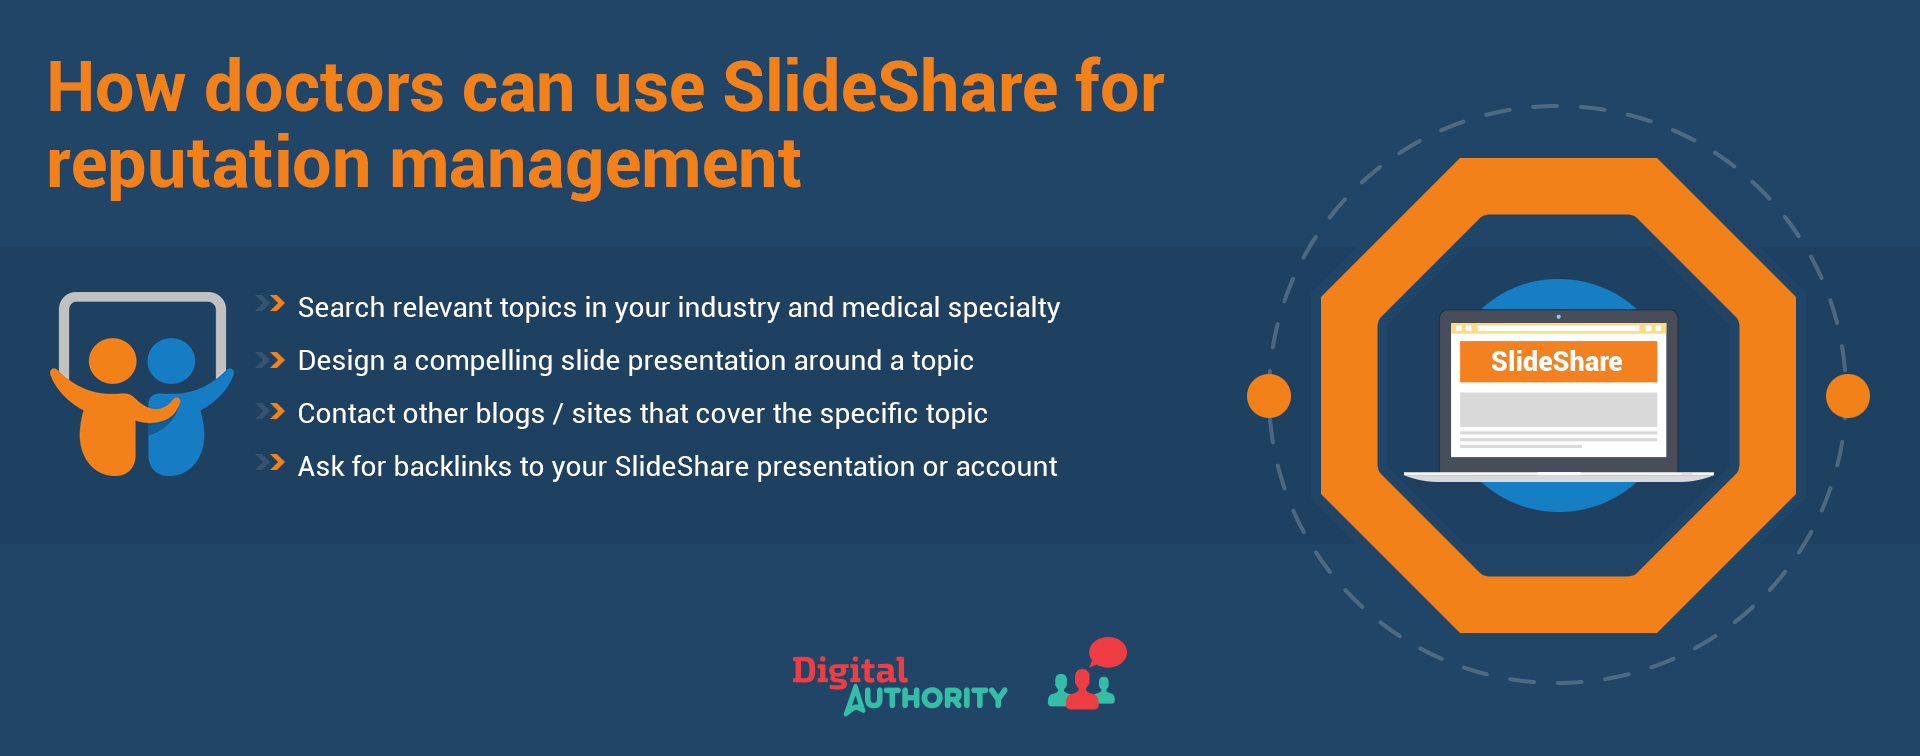 Infographic explaining how doctors can use SlideShare for reputation management.